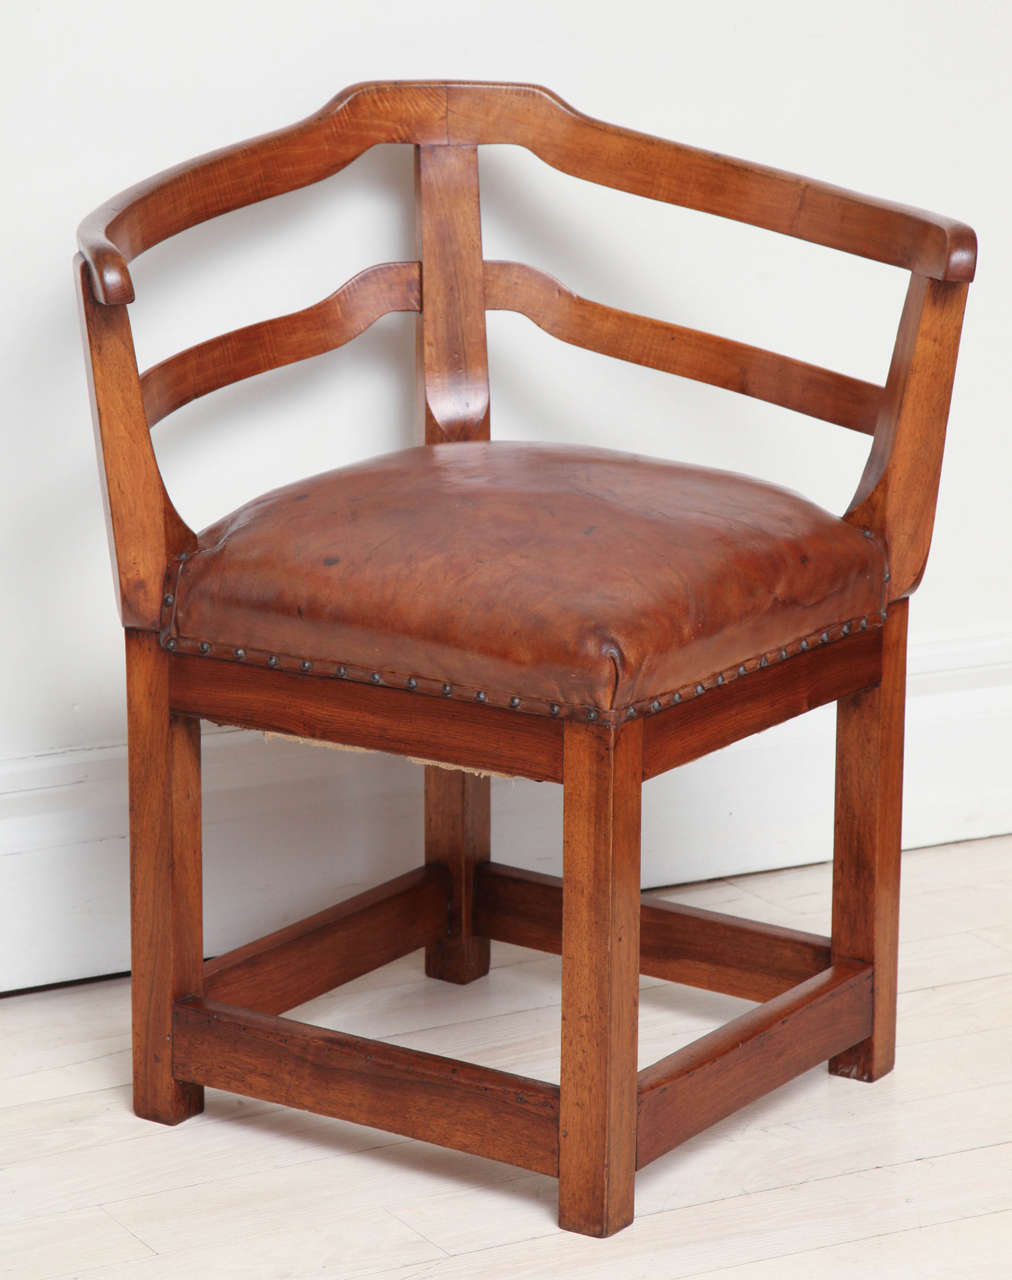 Early 19th Century French Walnut Corner Chair with Original Leather Seat 1